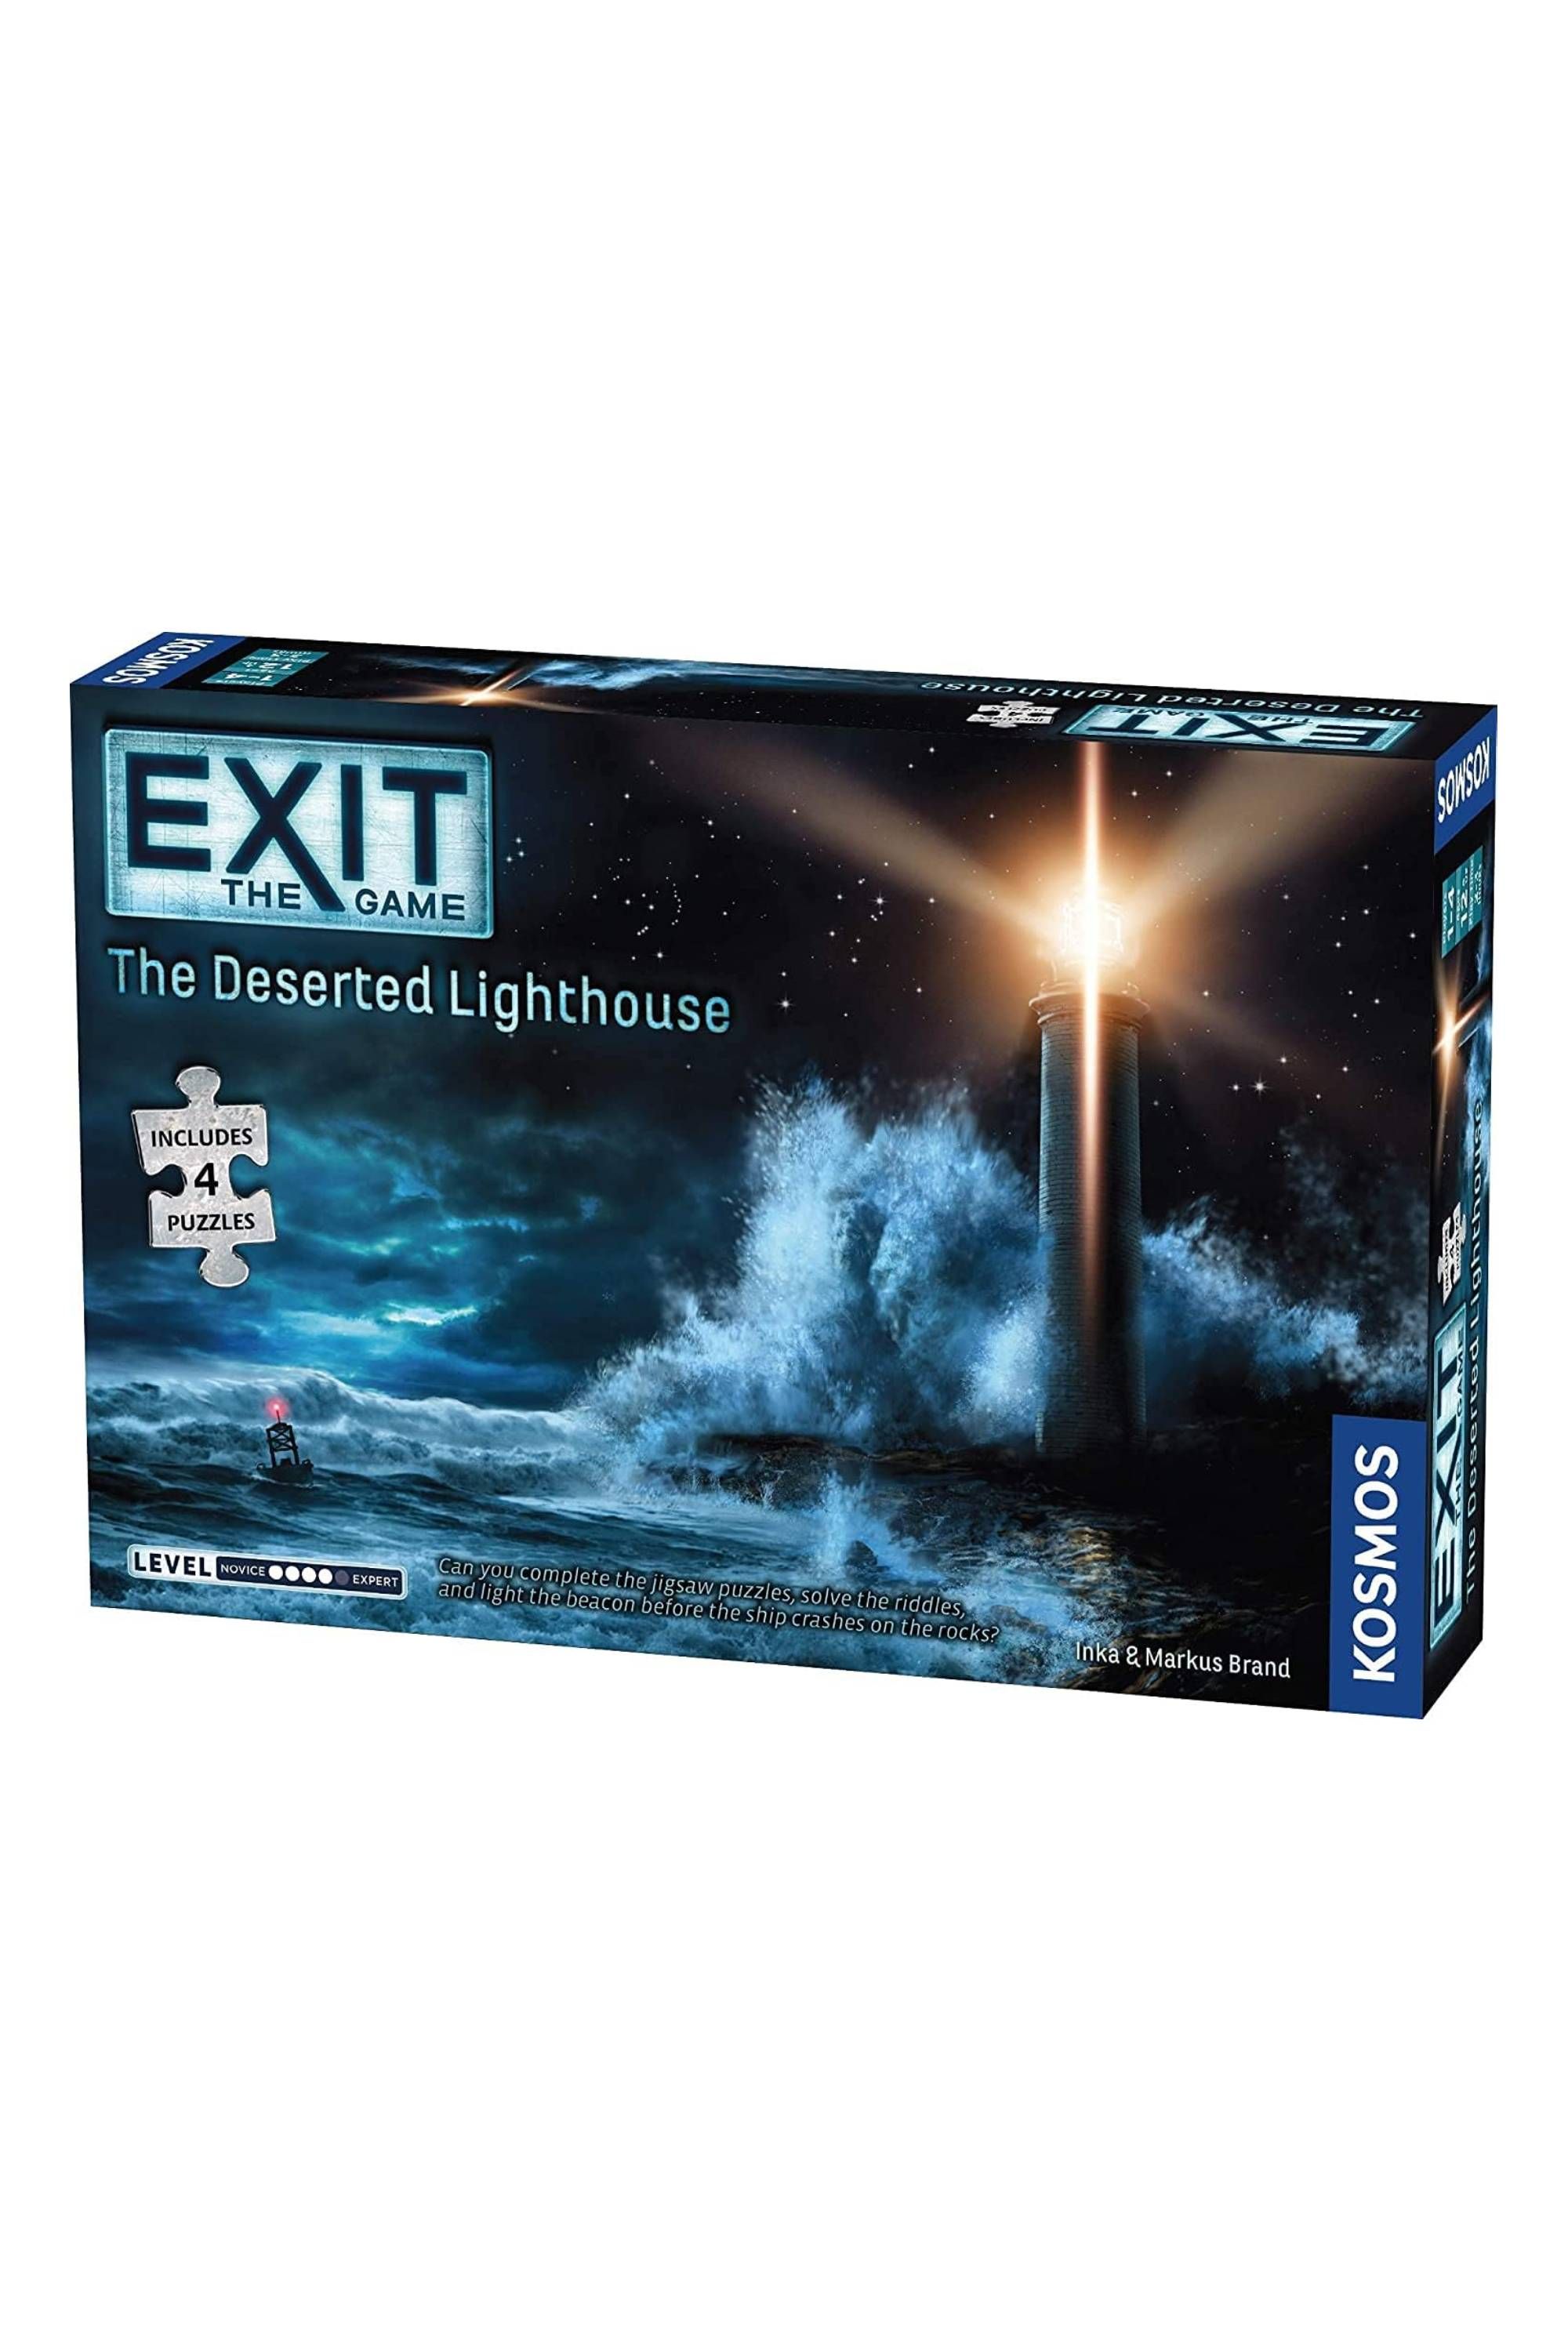 Exit - The Game - The Deserted Lighthouse